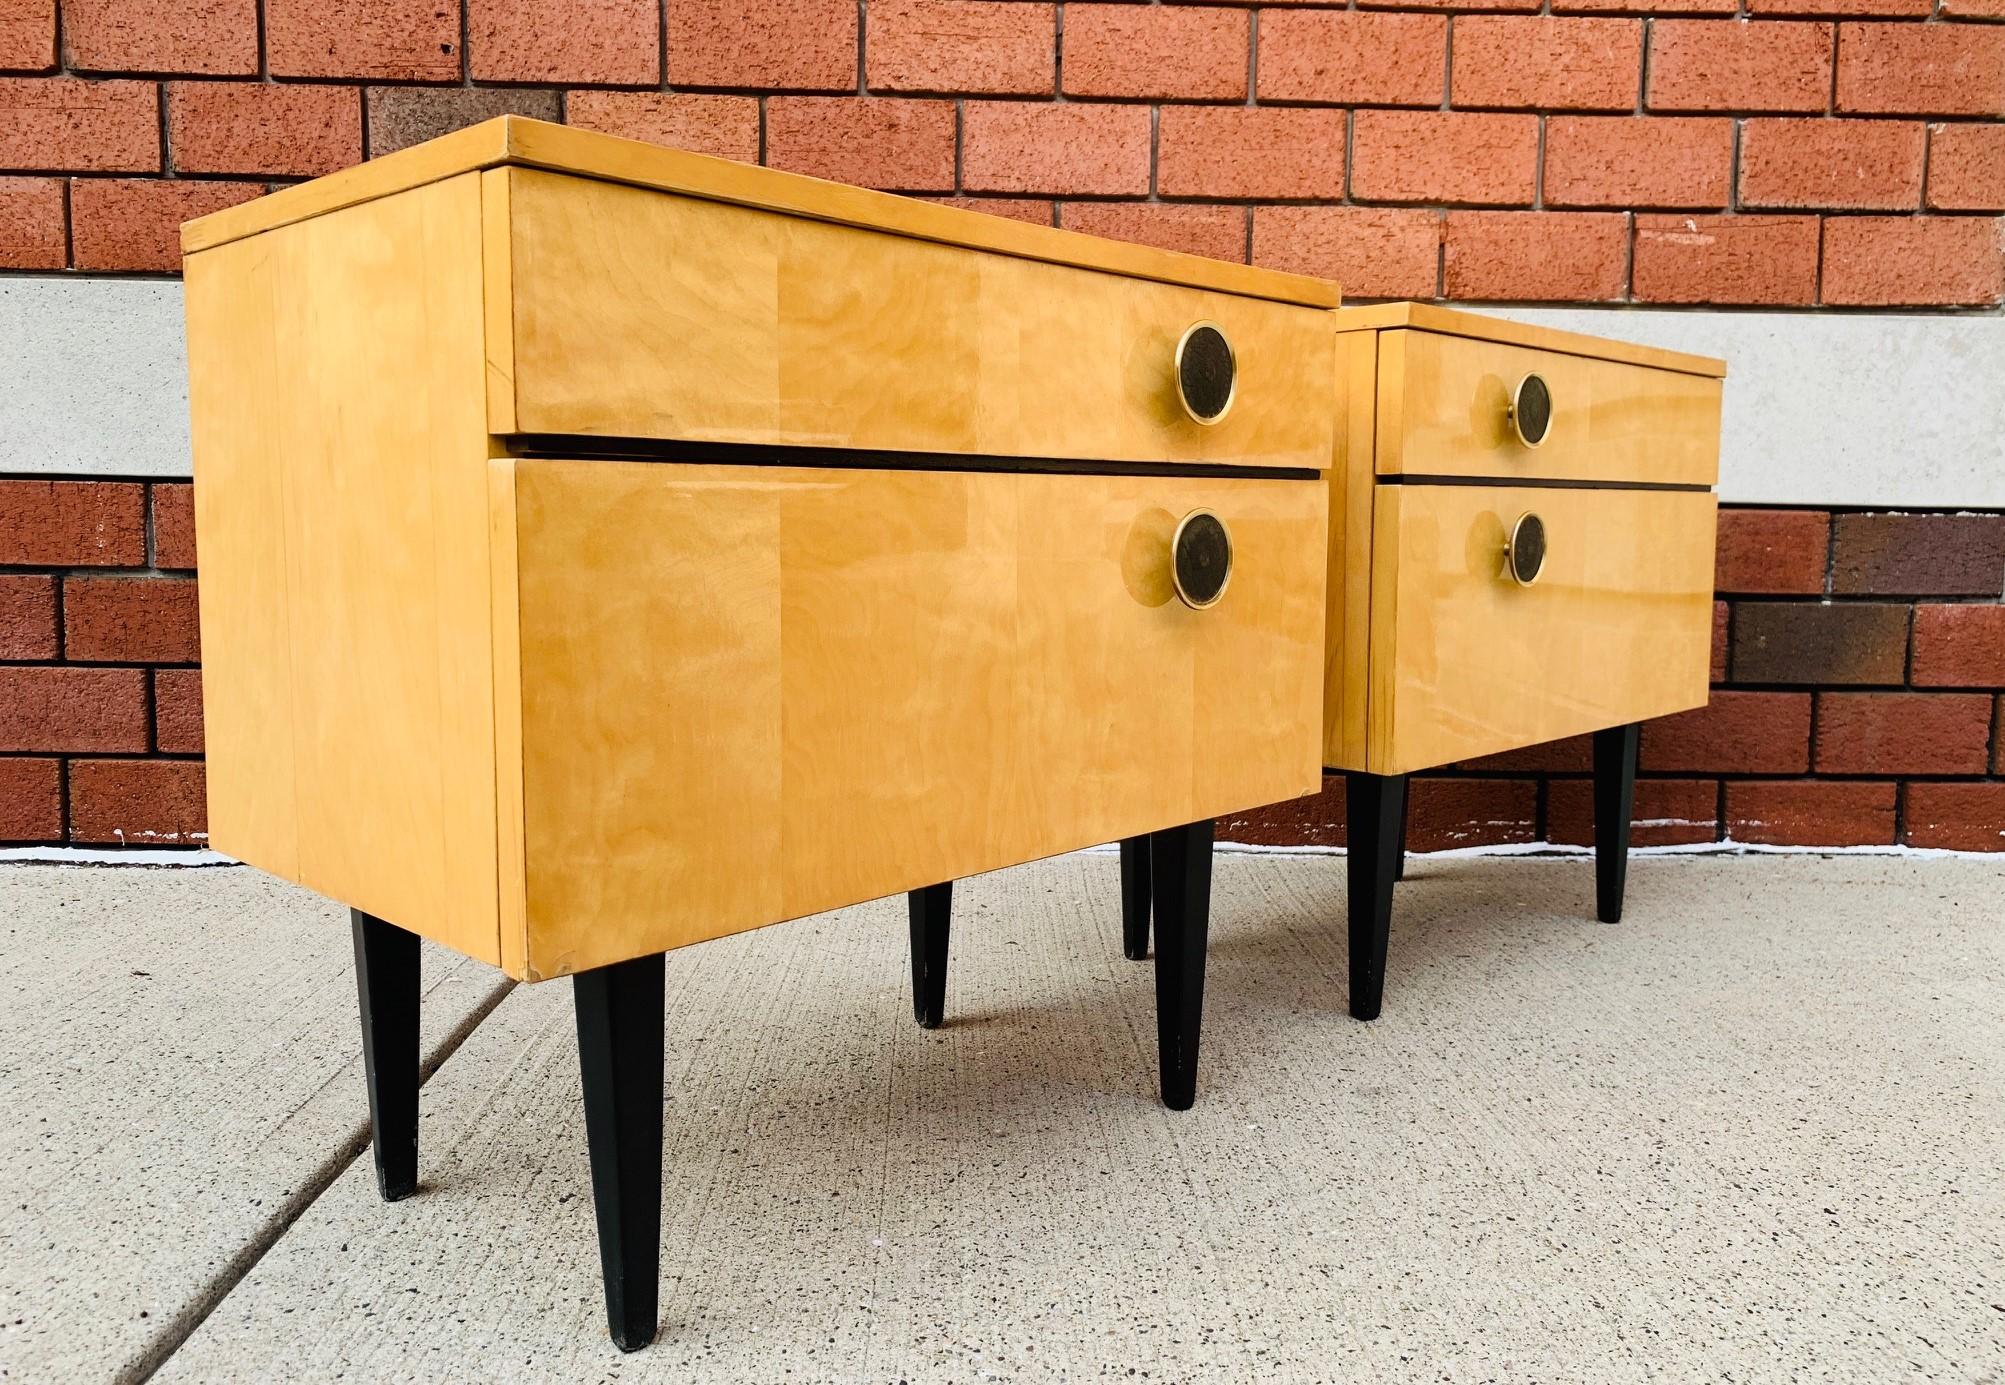 Pair of 1950s Italian nightstands. The nightstands are birch, has a single pull out drawer and a pull down cabinet door with storage. Has embossed leather pull handles and wooden black lacquered legs.
Measures: 12.75 D x 21.5 W x 20.5 H
Inside